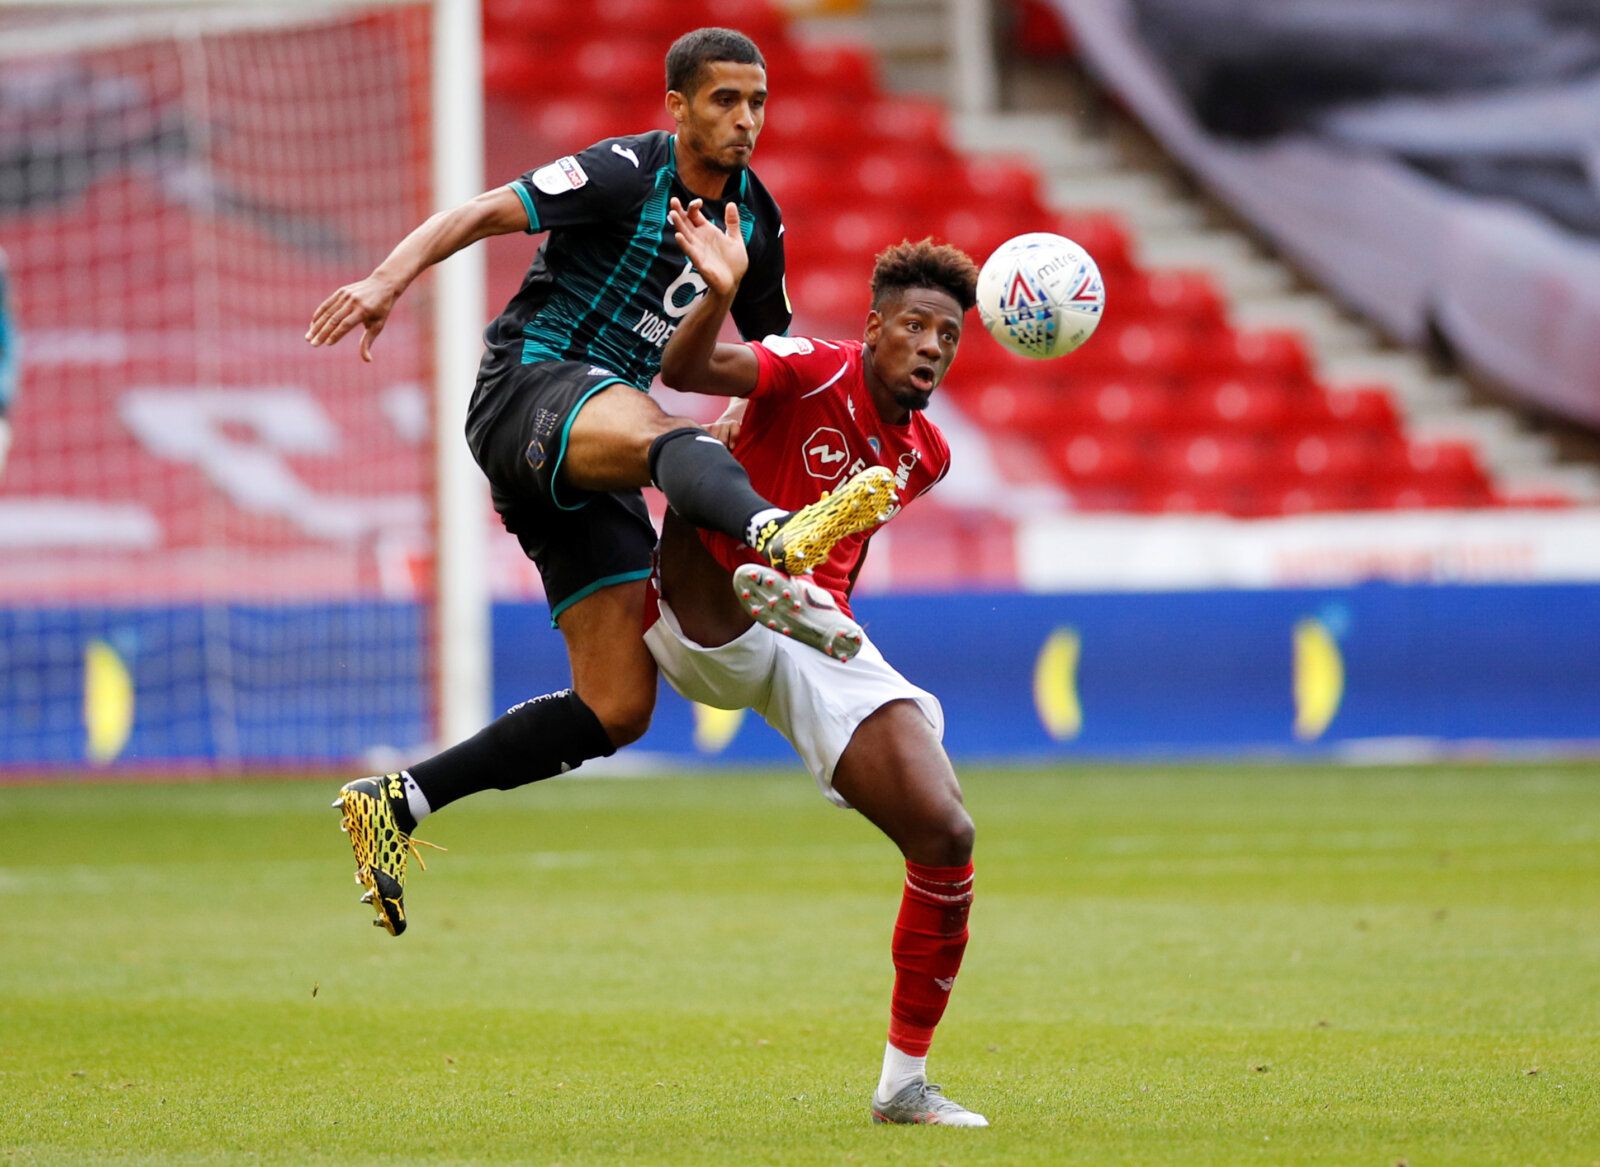 Soccer Football - Championship - Nottingham Forest v Swansea City - The City Ground, Nottingham, Britain - July 15, 2020   Swansea City's Kyle Naughton in action with Nottingham Forest's Nuno Da Costa, as play resumes behind closed doors following the outbreak of the coronavirus disease (COVID-19)   Action Images/Andrew Boyers    EDITORIAL USE ONLY. No use with unauthorized audio, video, data, fixture lists, club/league logos or 